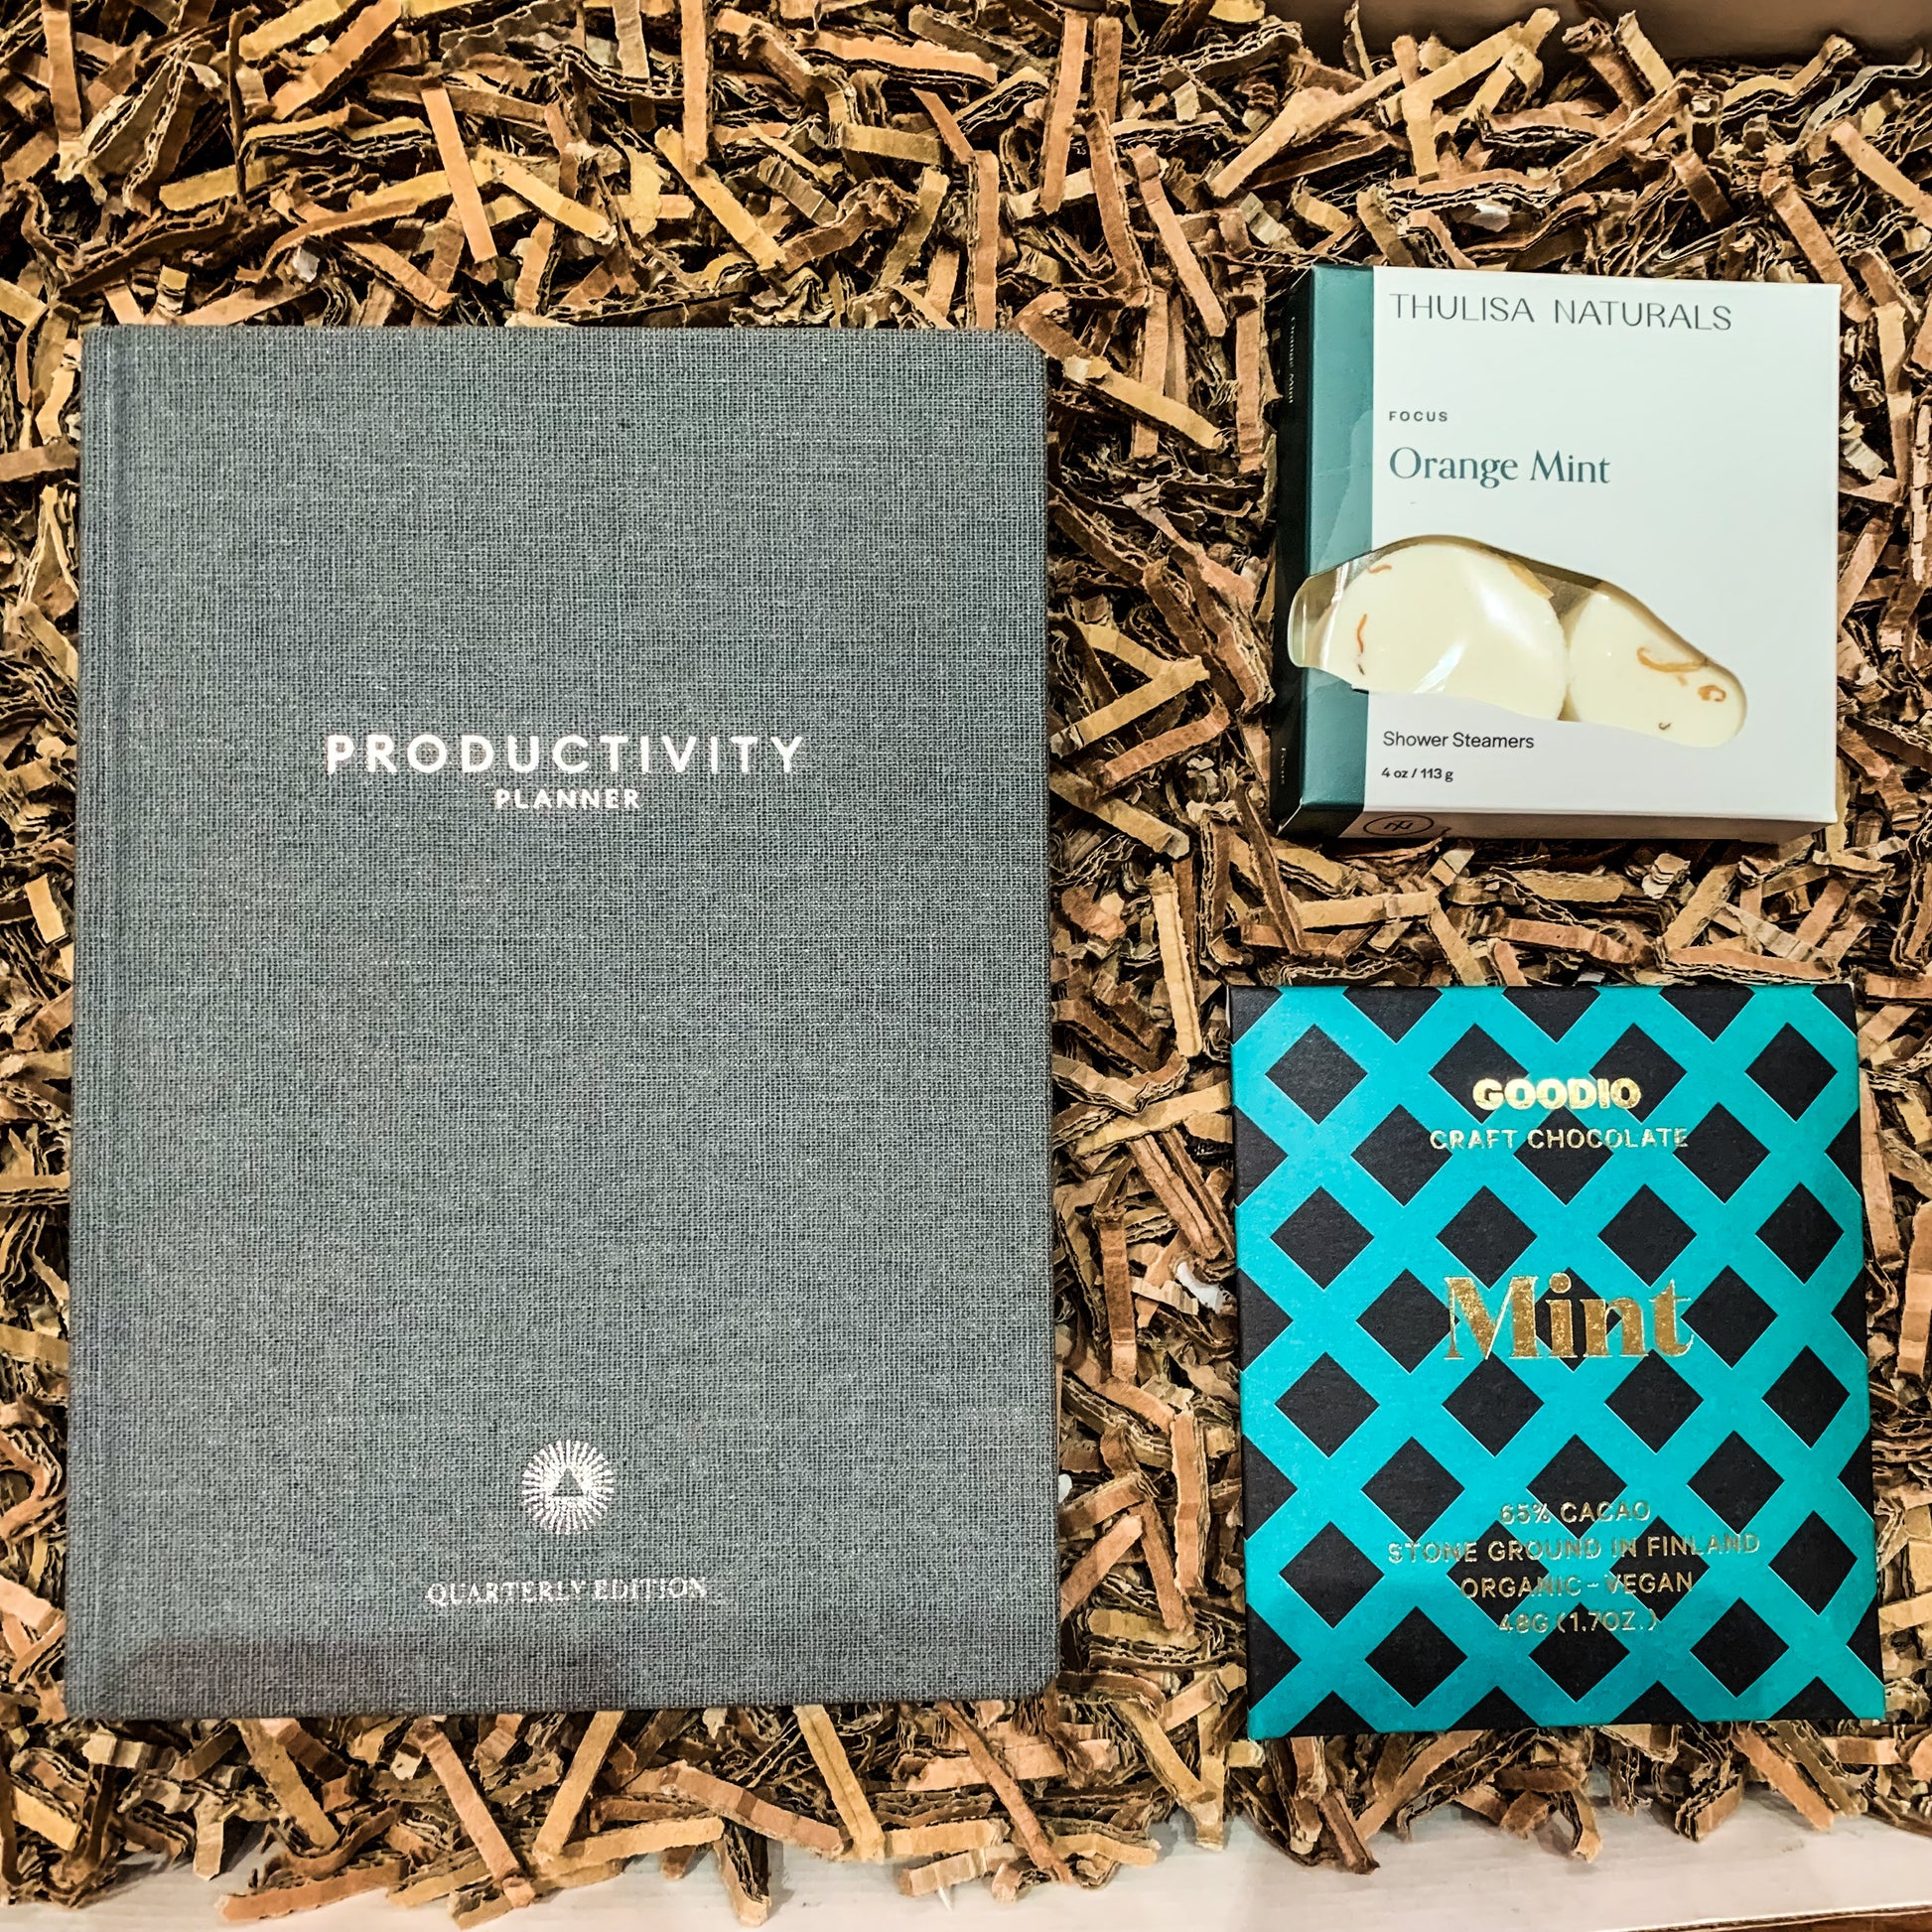 "Daily Productivity" office gift box overhead shot with a quarterly productivity planner, a vegan mint chocolate and orange mint essential oil shower steamers.